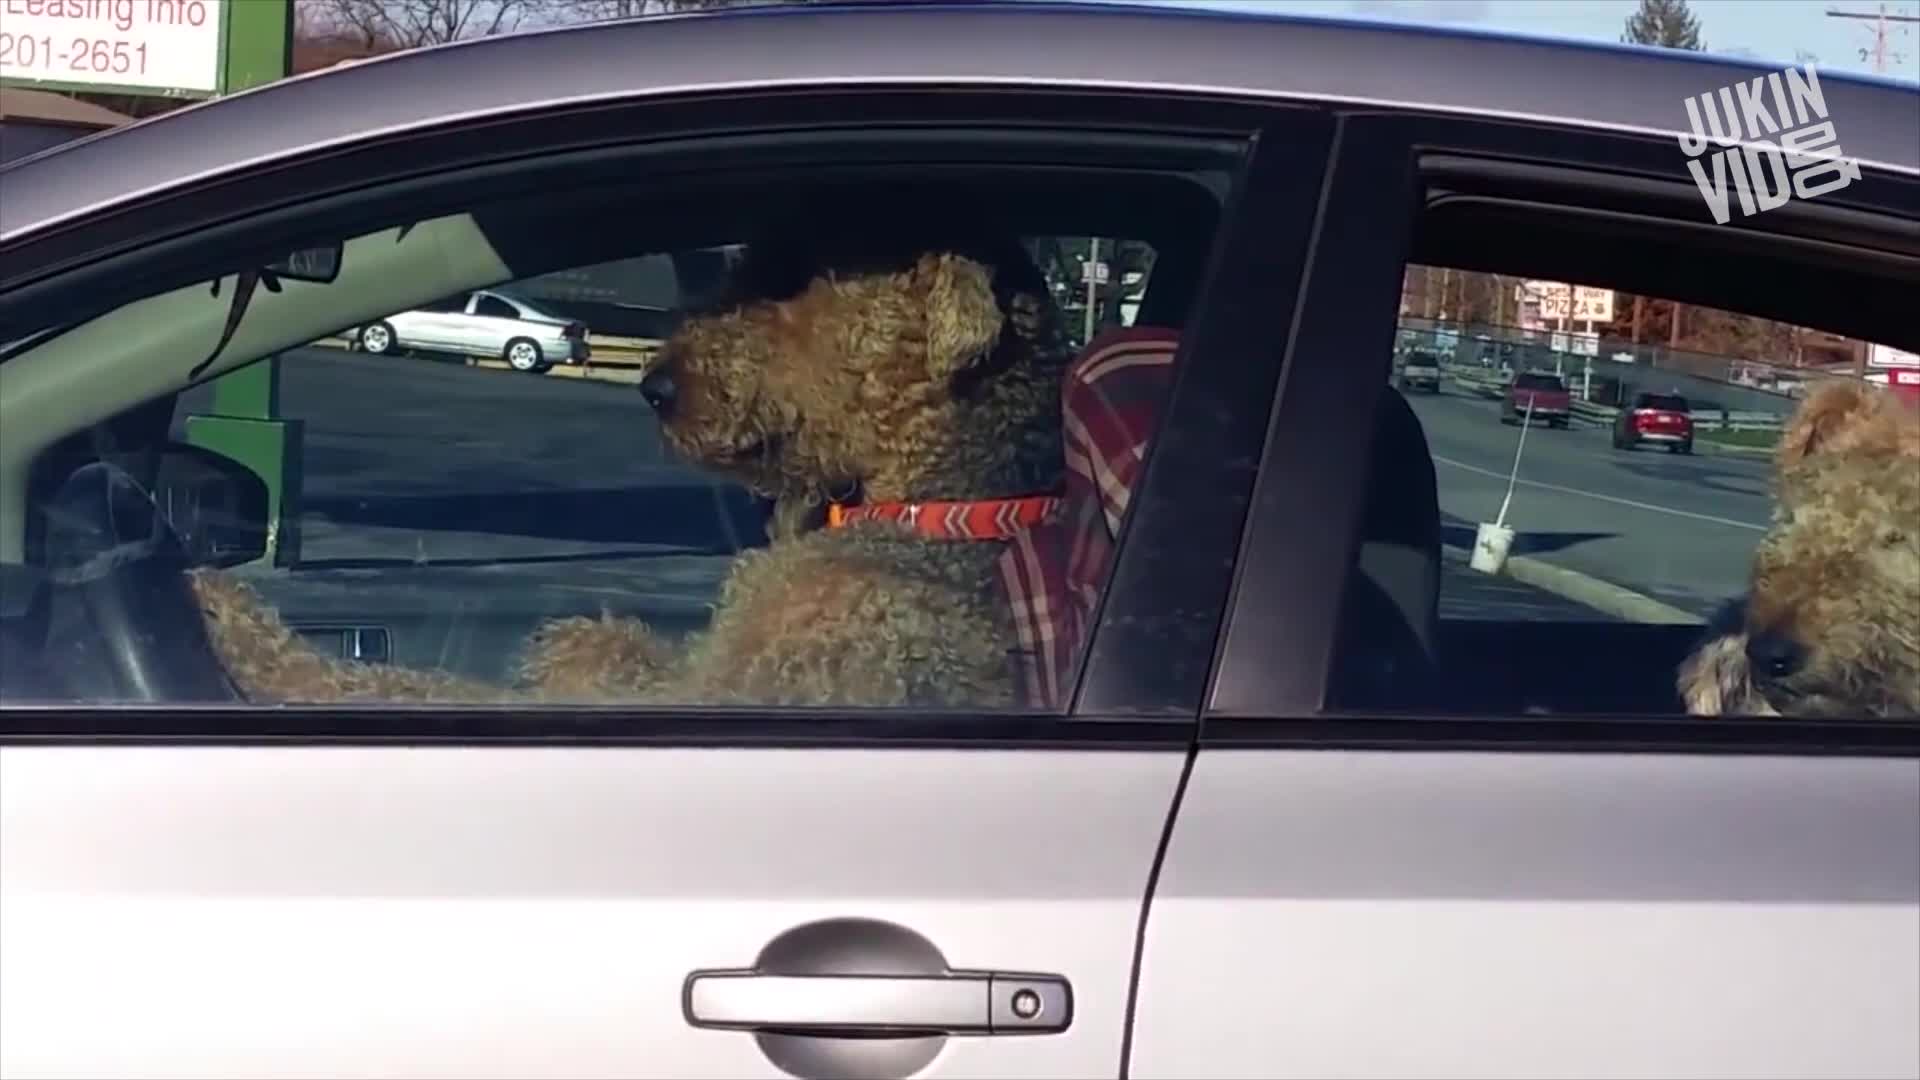 Impatient Dogs Waiting in Car